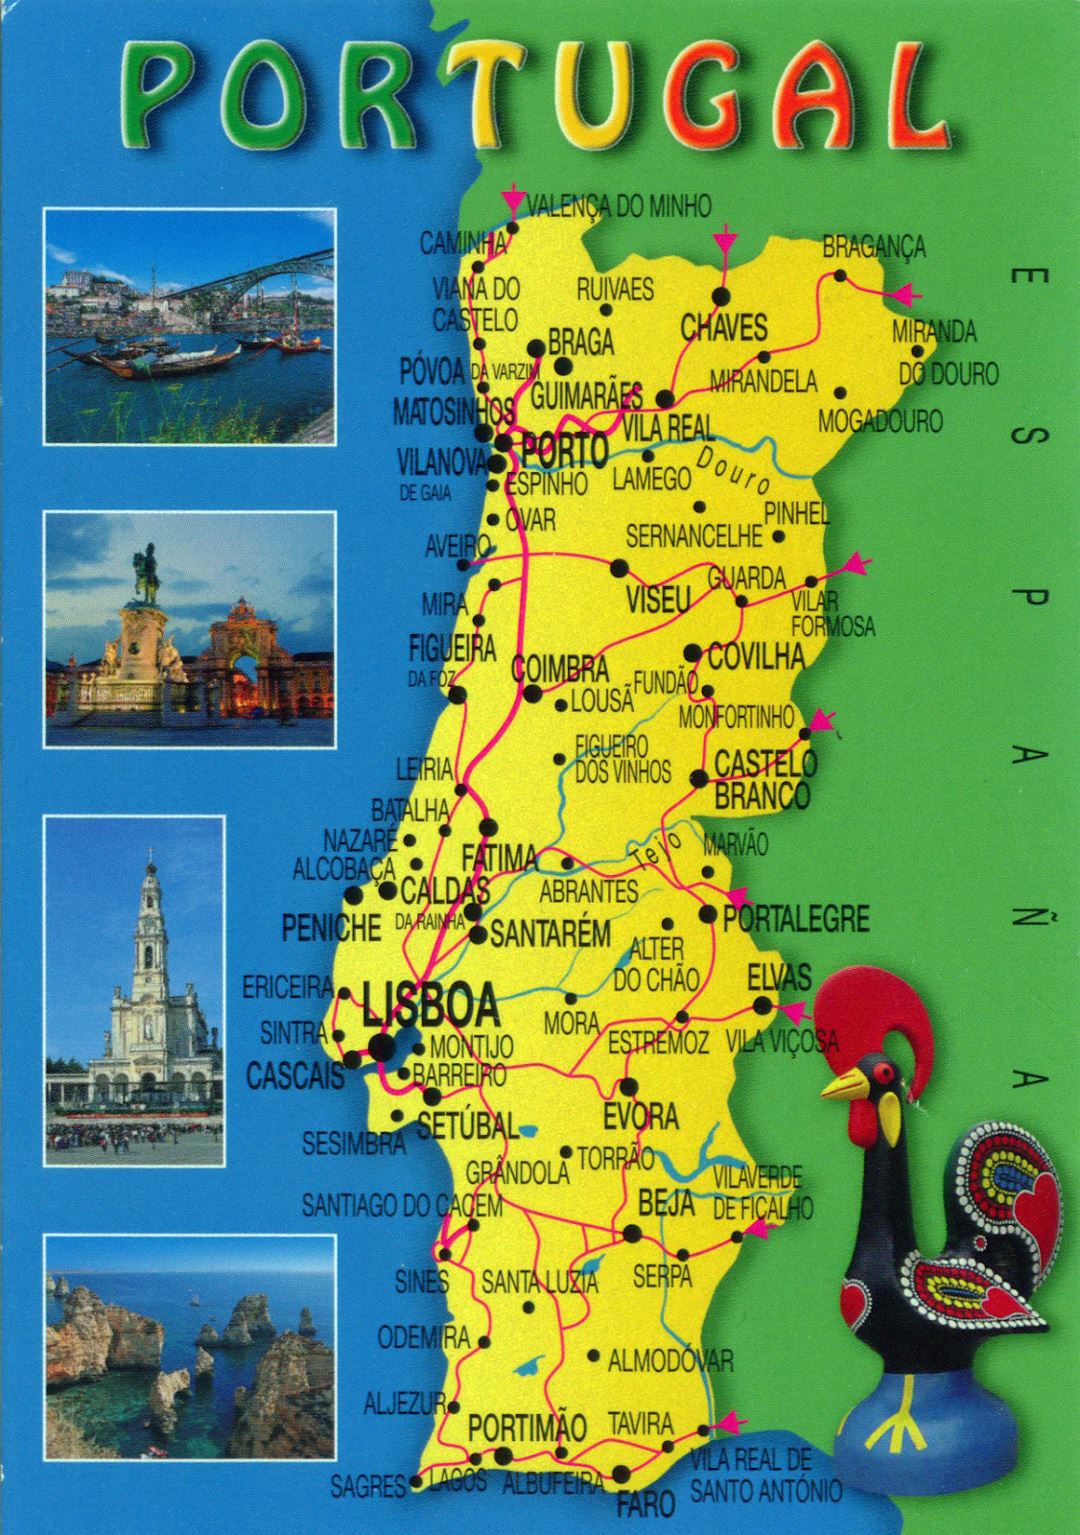 Large tourist map of Portugal with roads and cities